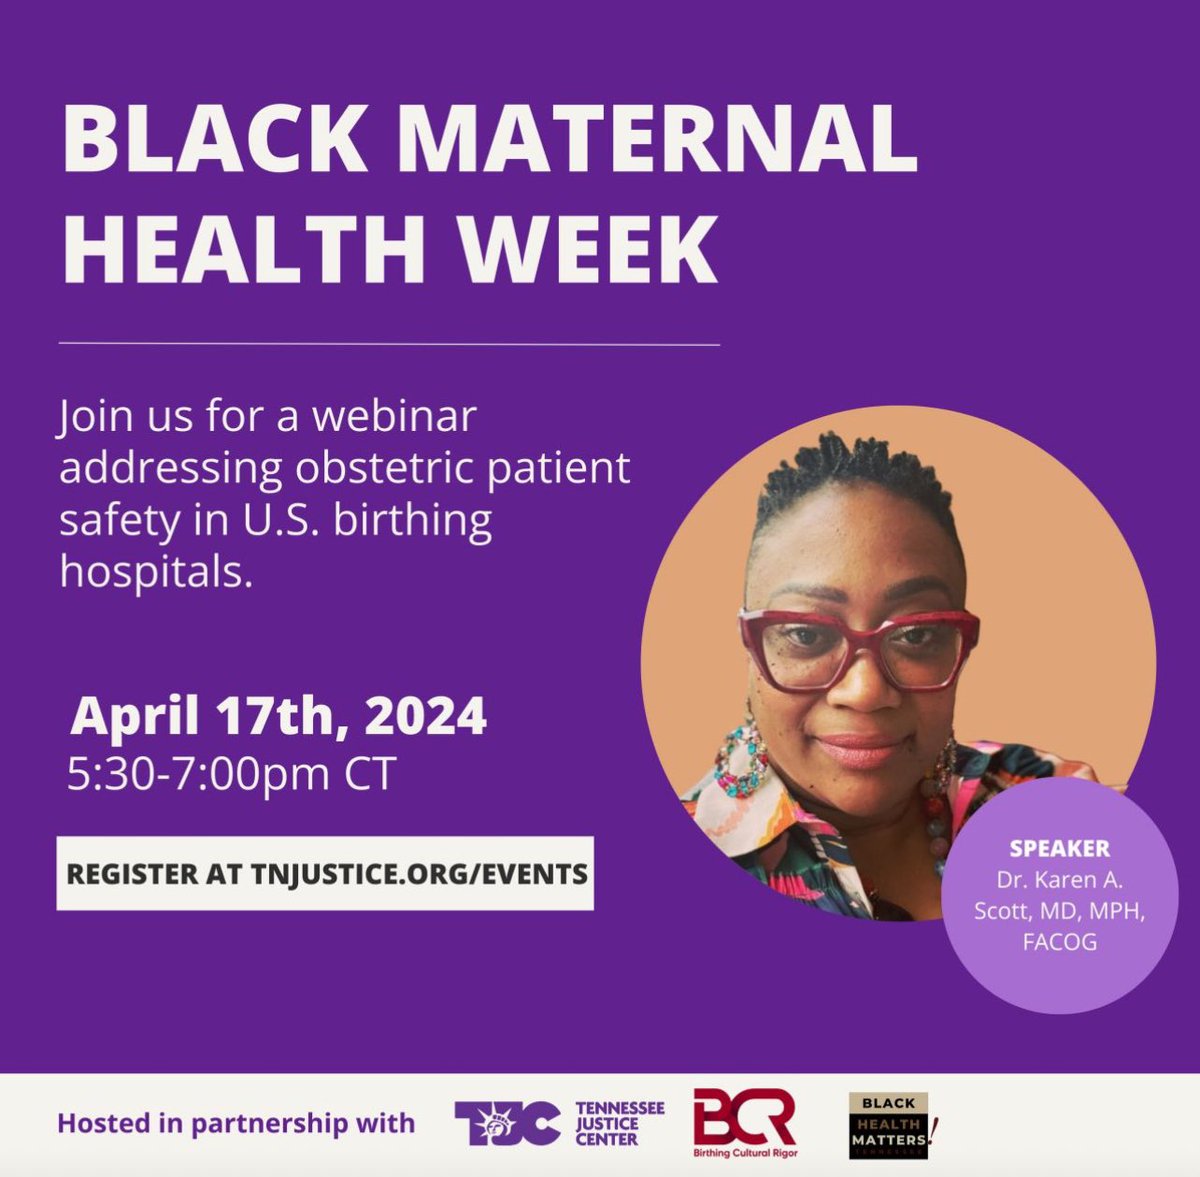 Join me for my first ever #BMHW webinar in my birth city and state of Nashville, TN on April 17 @ 5:30pm - 7pm, hosted by my new supporters and friends at @TNJusticeCenter Click on the link in my profile to register for the event ! For FB: tnjustice.org #BMWH24